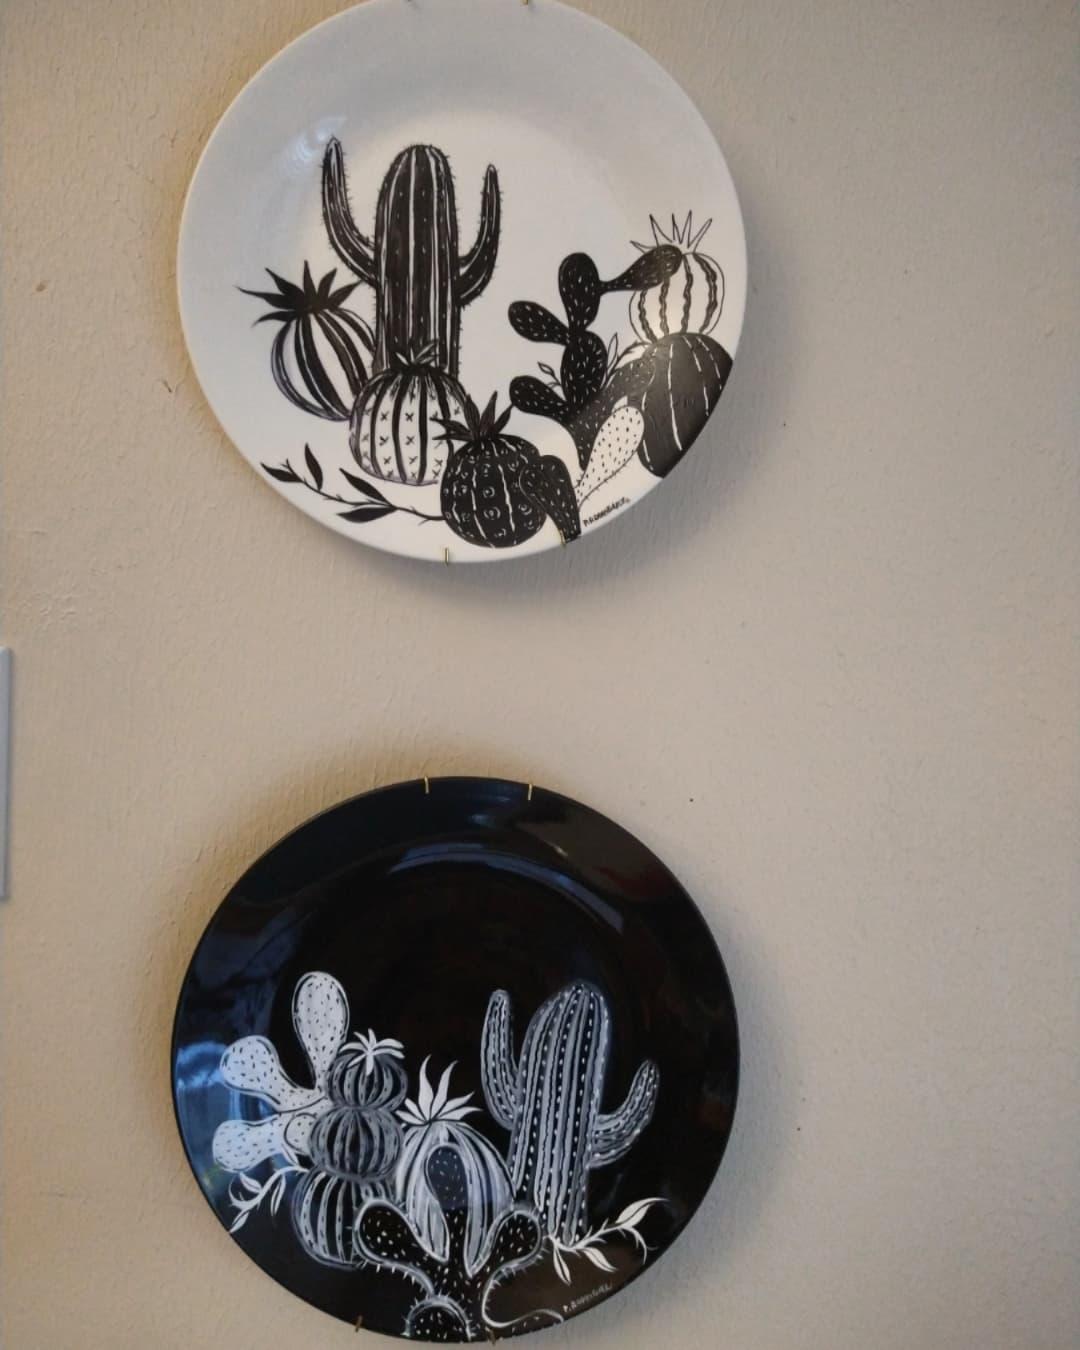 Prickly Plates